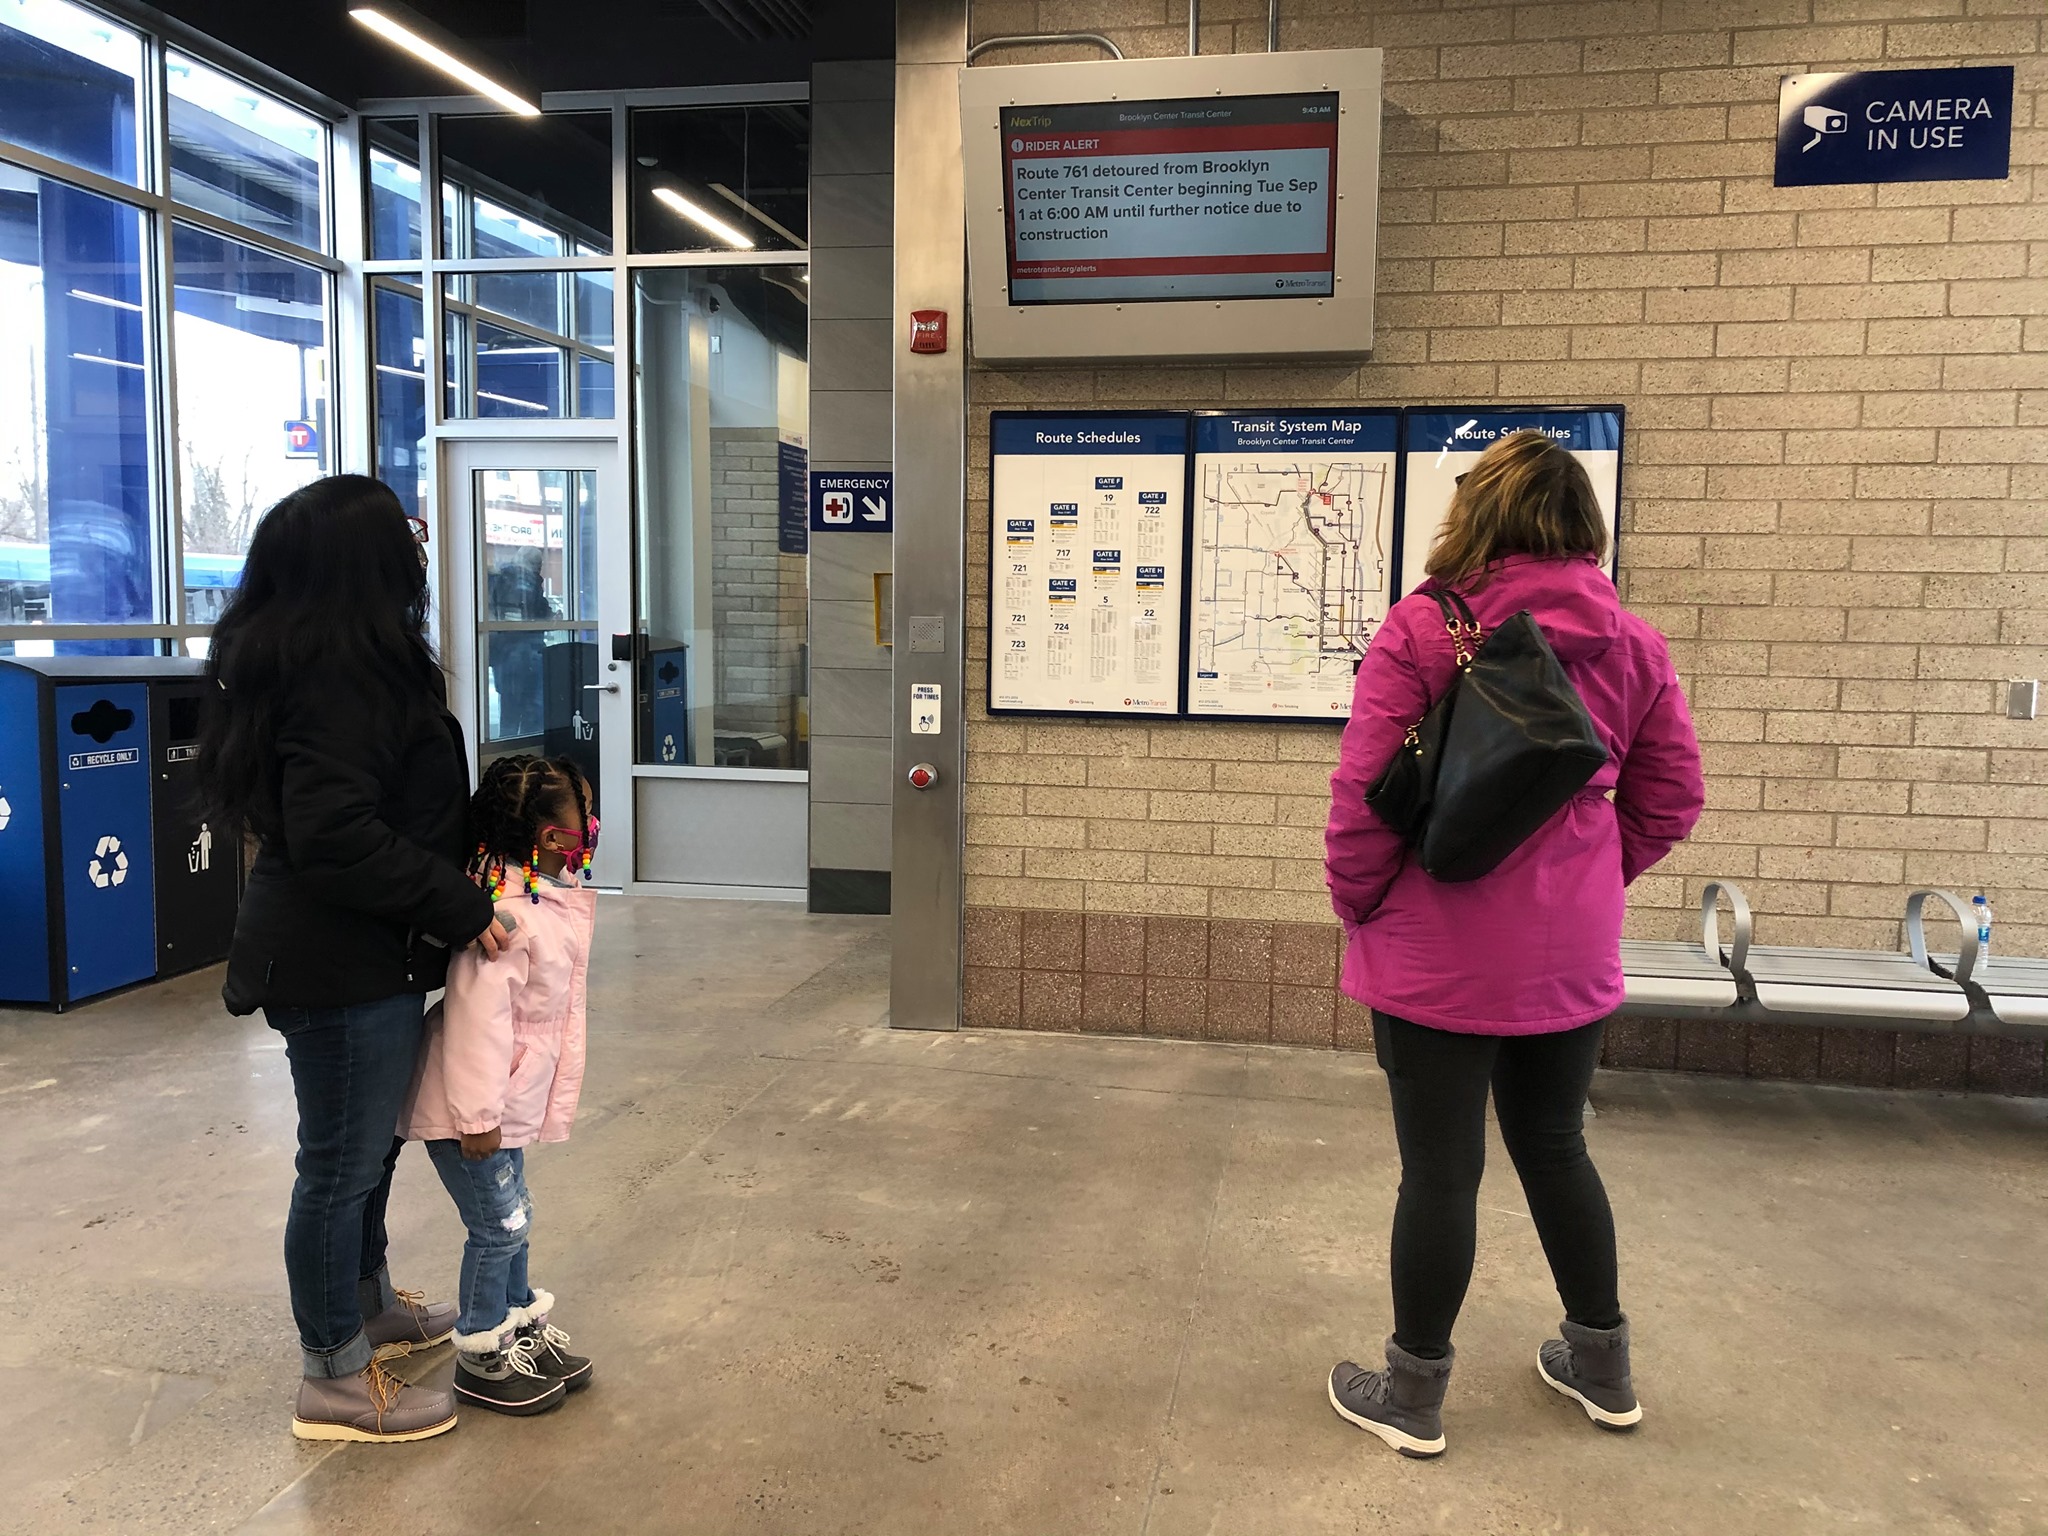 Customers view real-time information at an indoor display at Brooklyn Center Transit Center